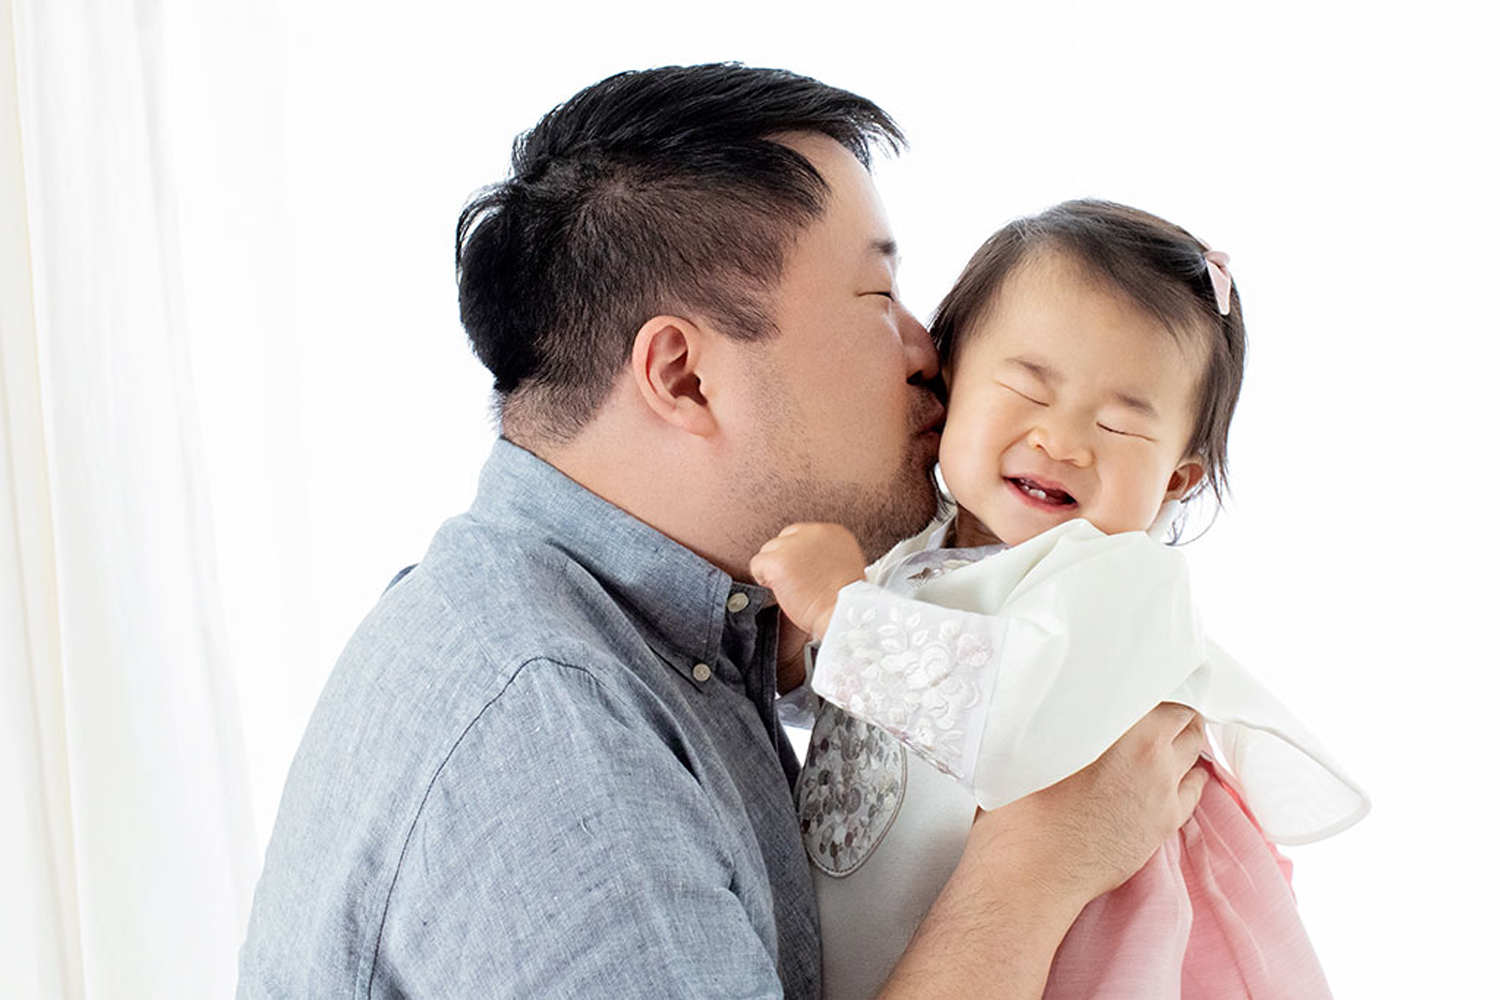 A dad kisses his one-year-old.